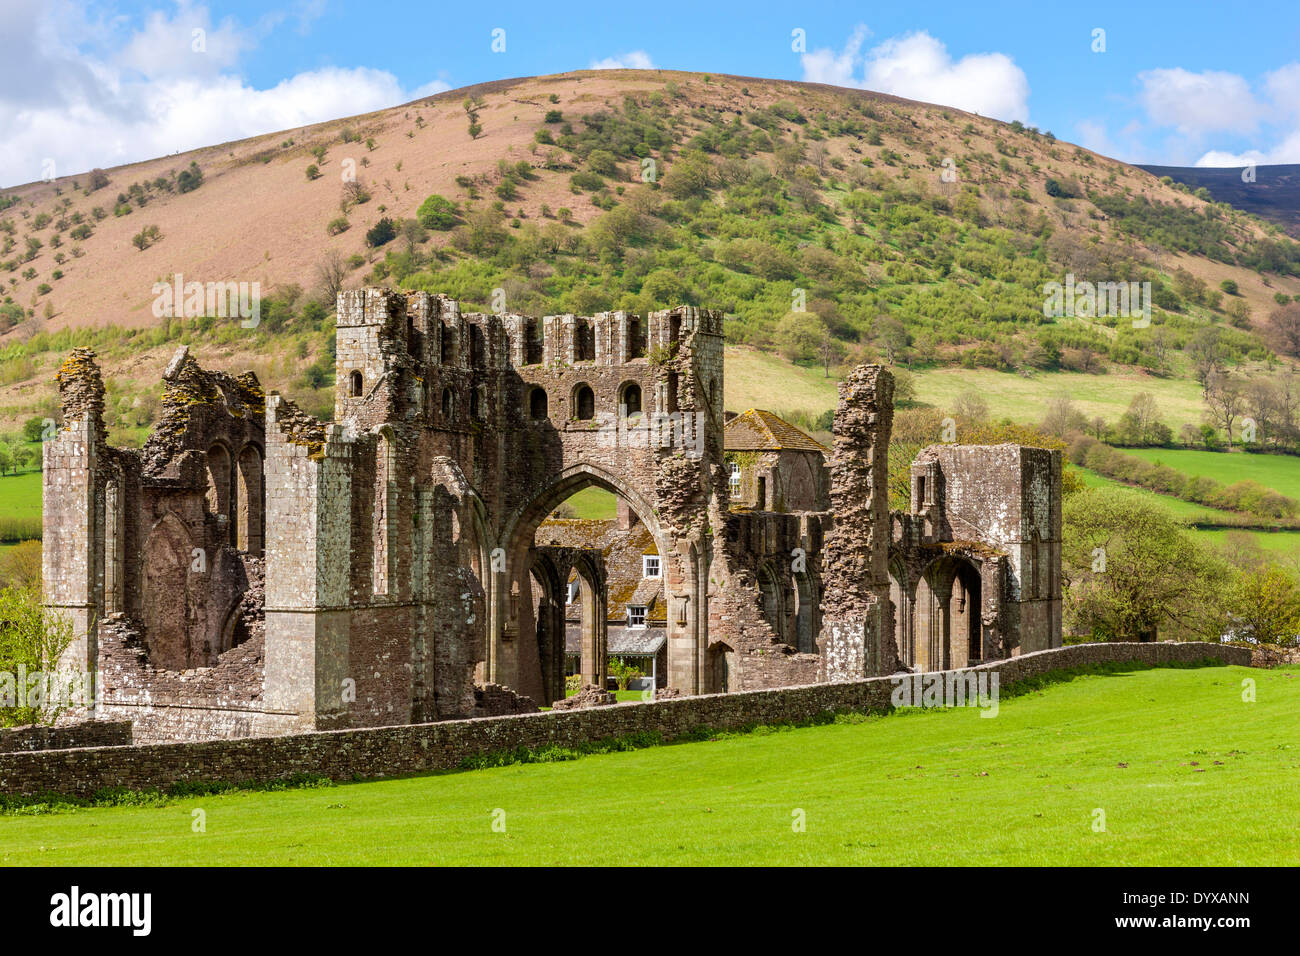 Remains of the 12th century Llanthony Priory in the Vale of Ewyas, Black Mountains, Brecon Beacons National Park. Stock Photo